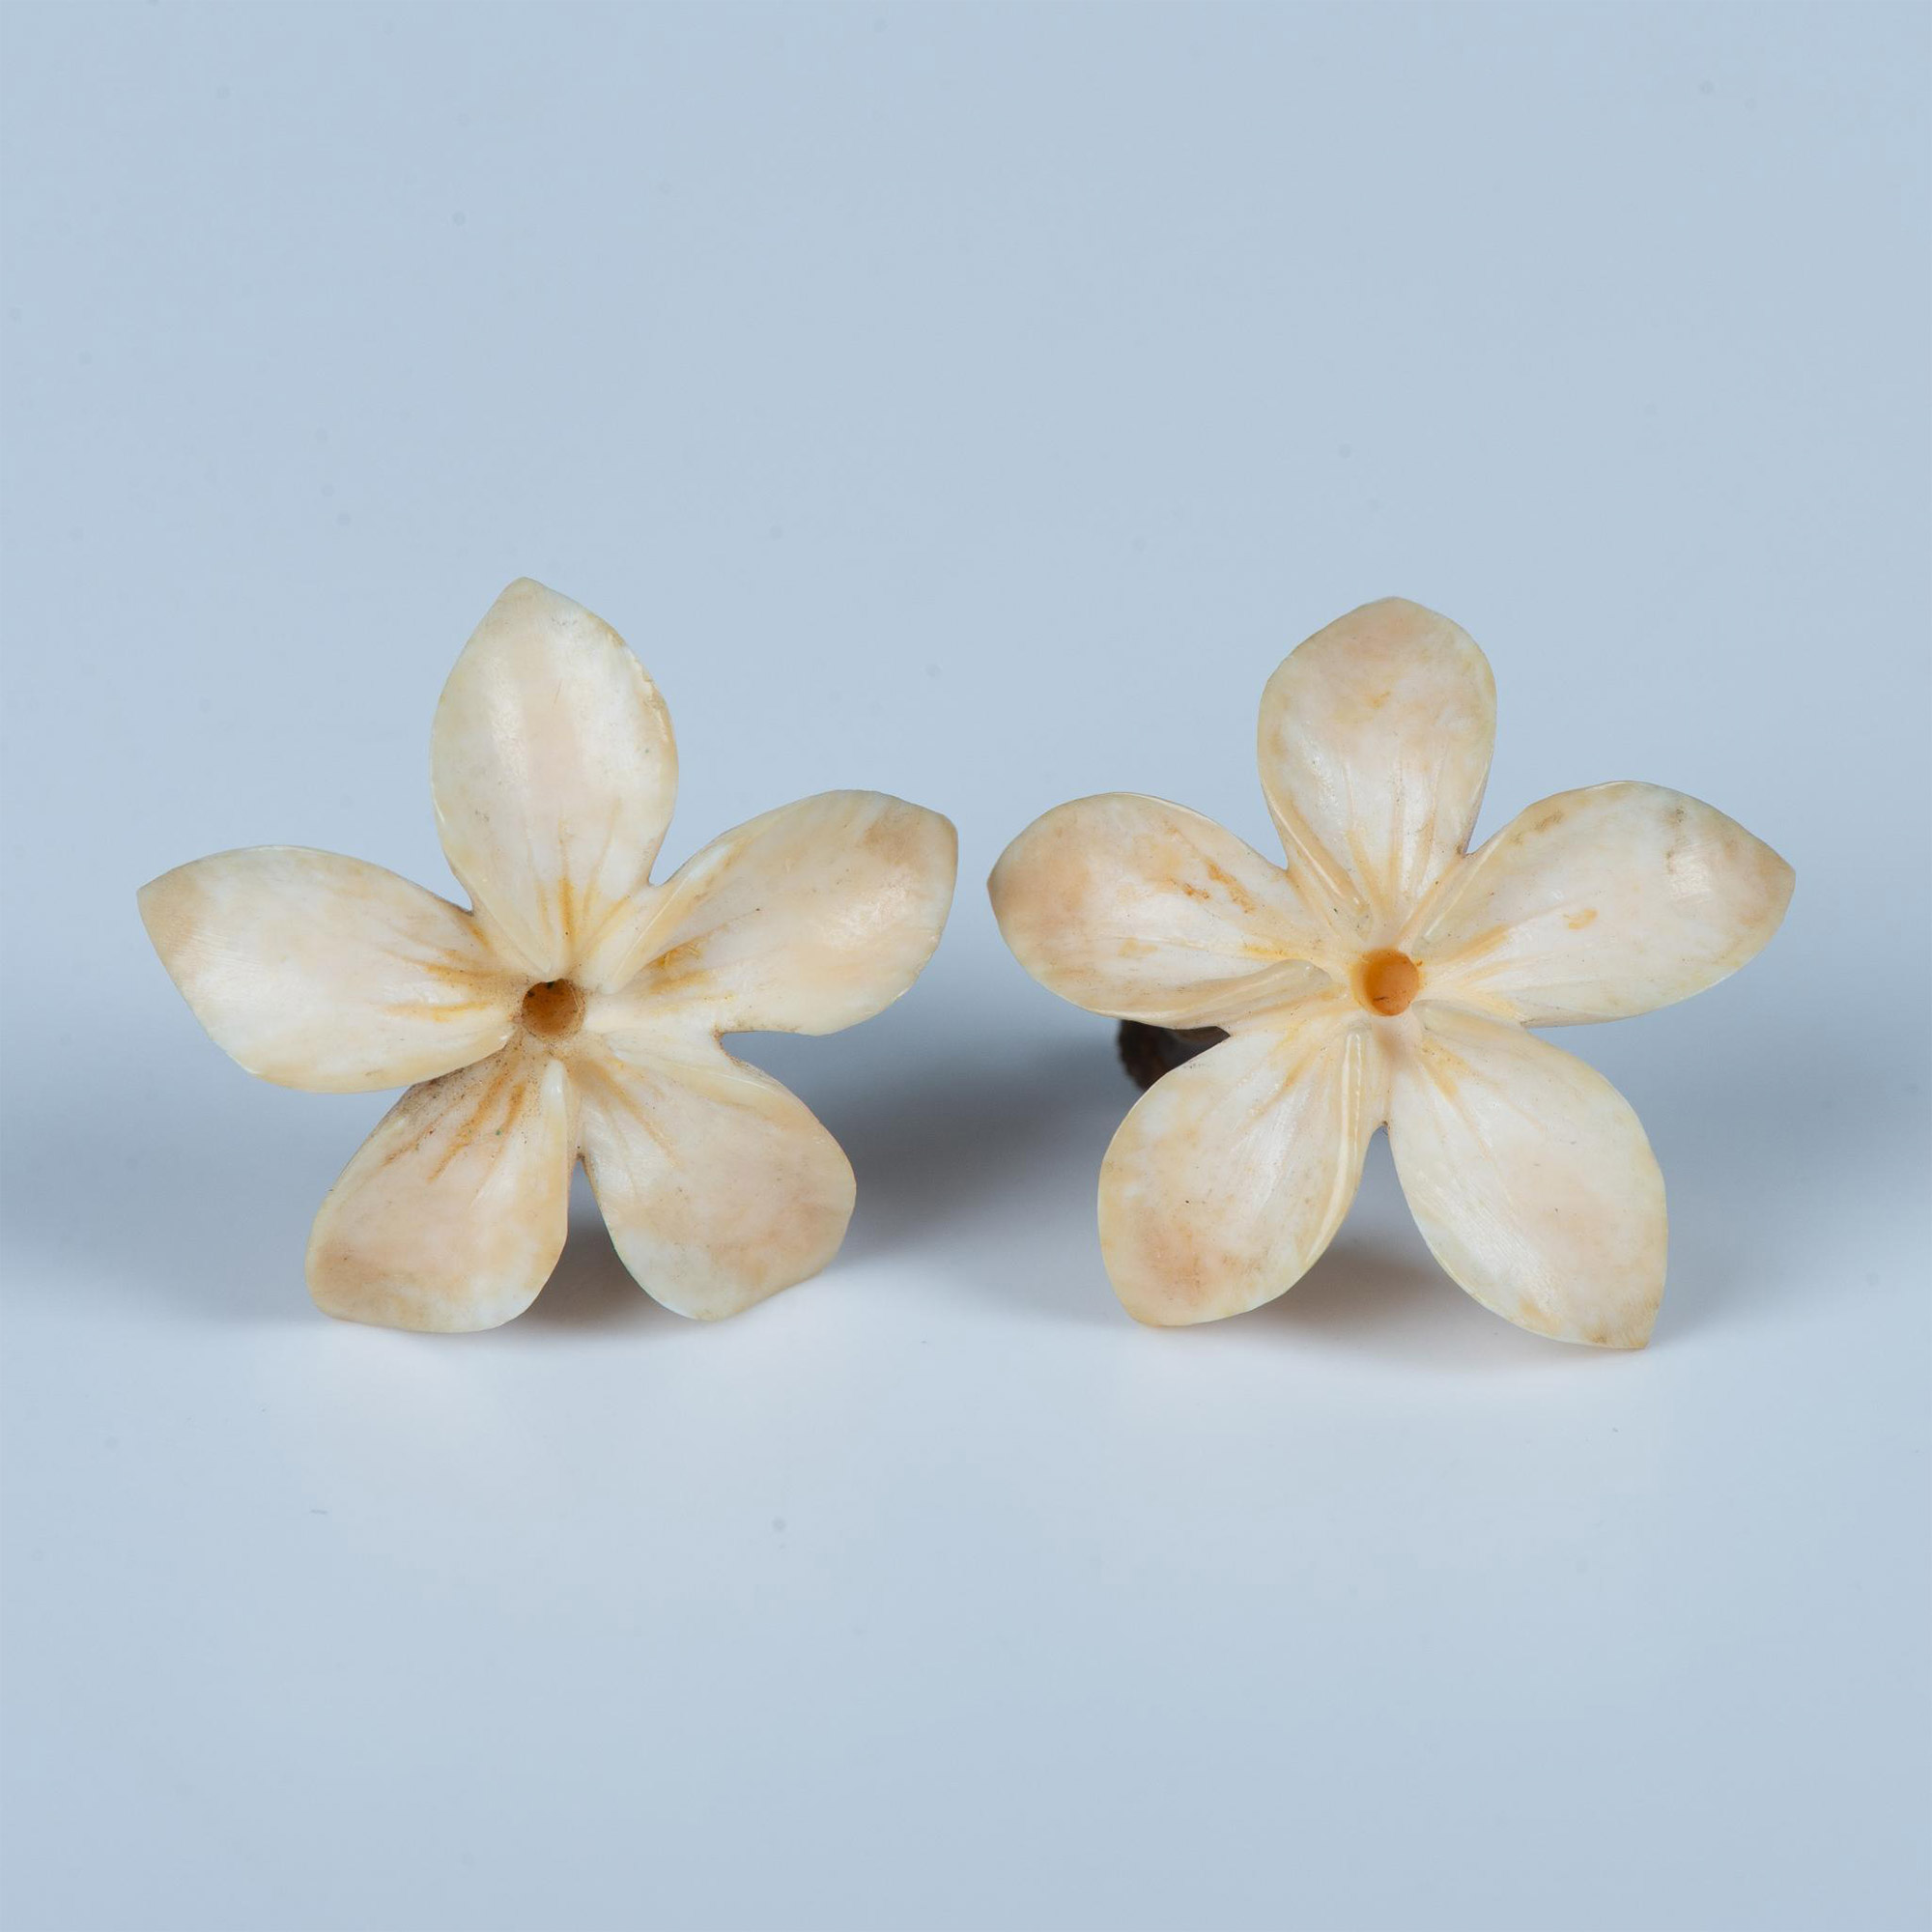 3 Pairs of Creamy Color Earrings - Image 3 of 5